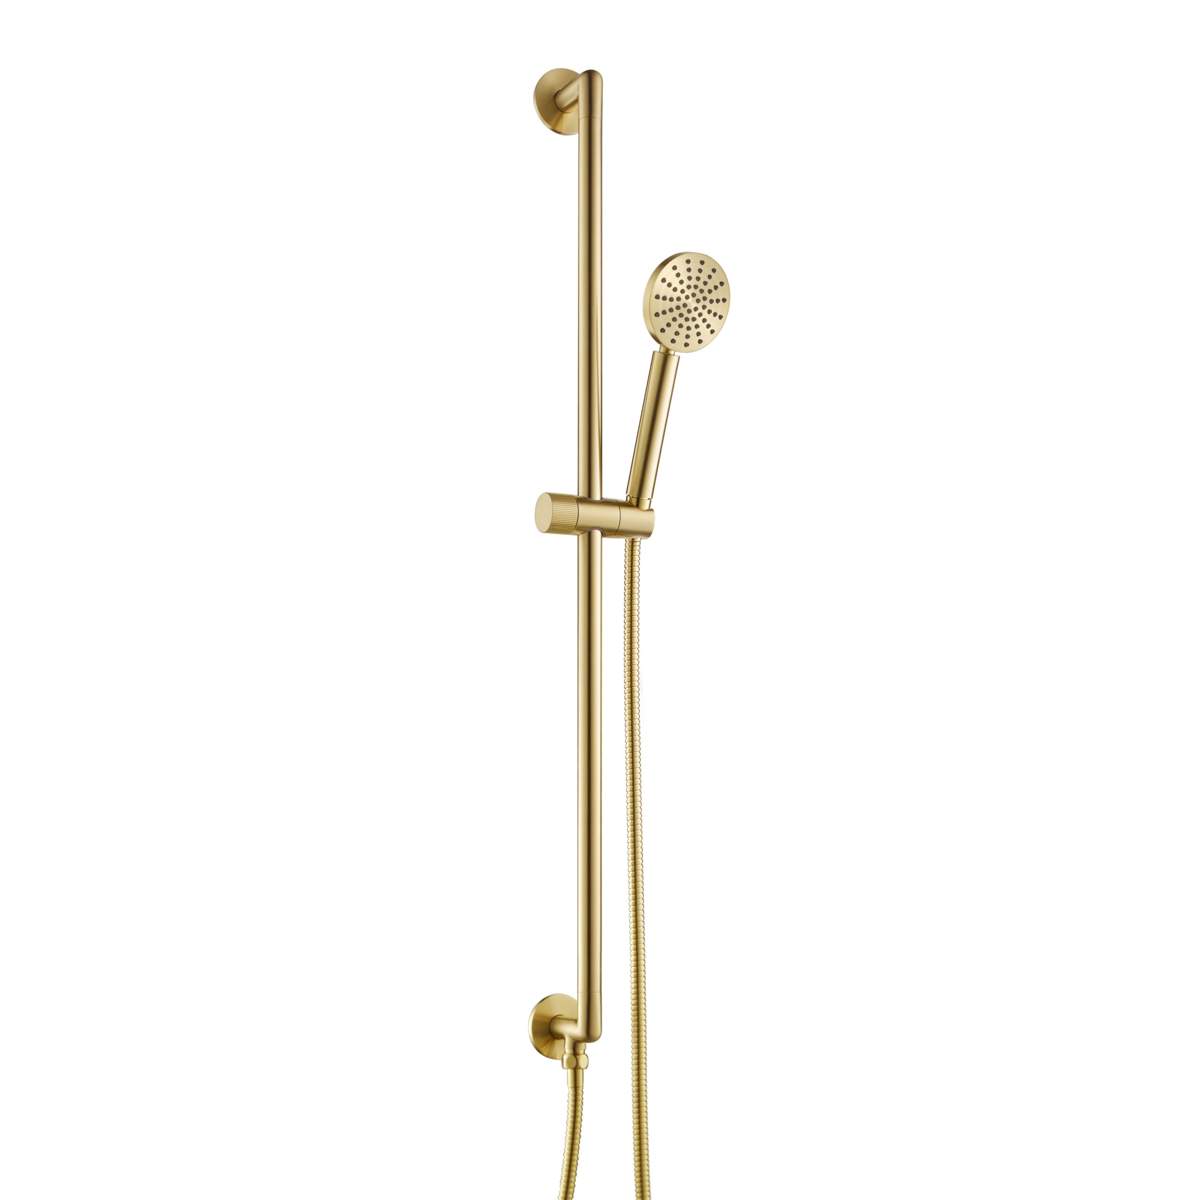 JTP Evo Brushed Brass Slide Rail with Round Shower Handle and Hose (63129510BBR)